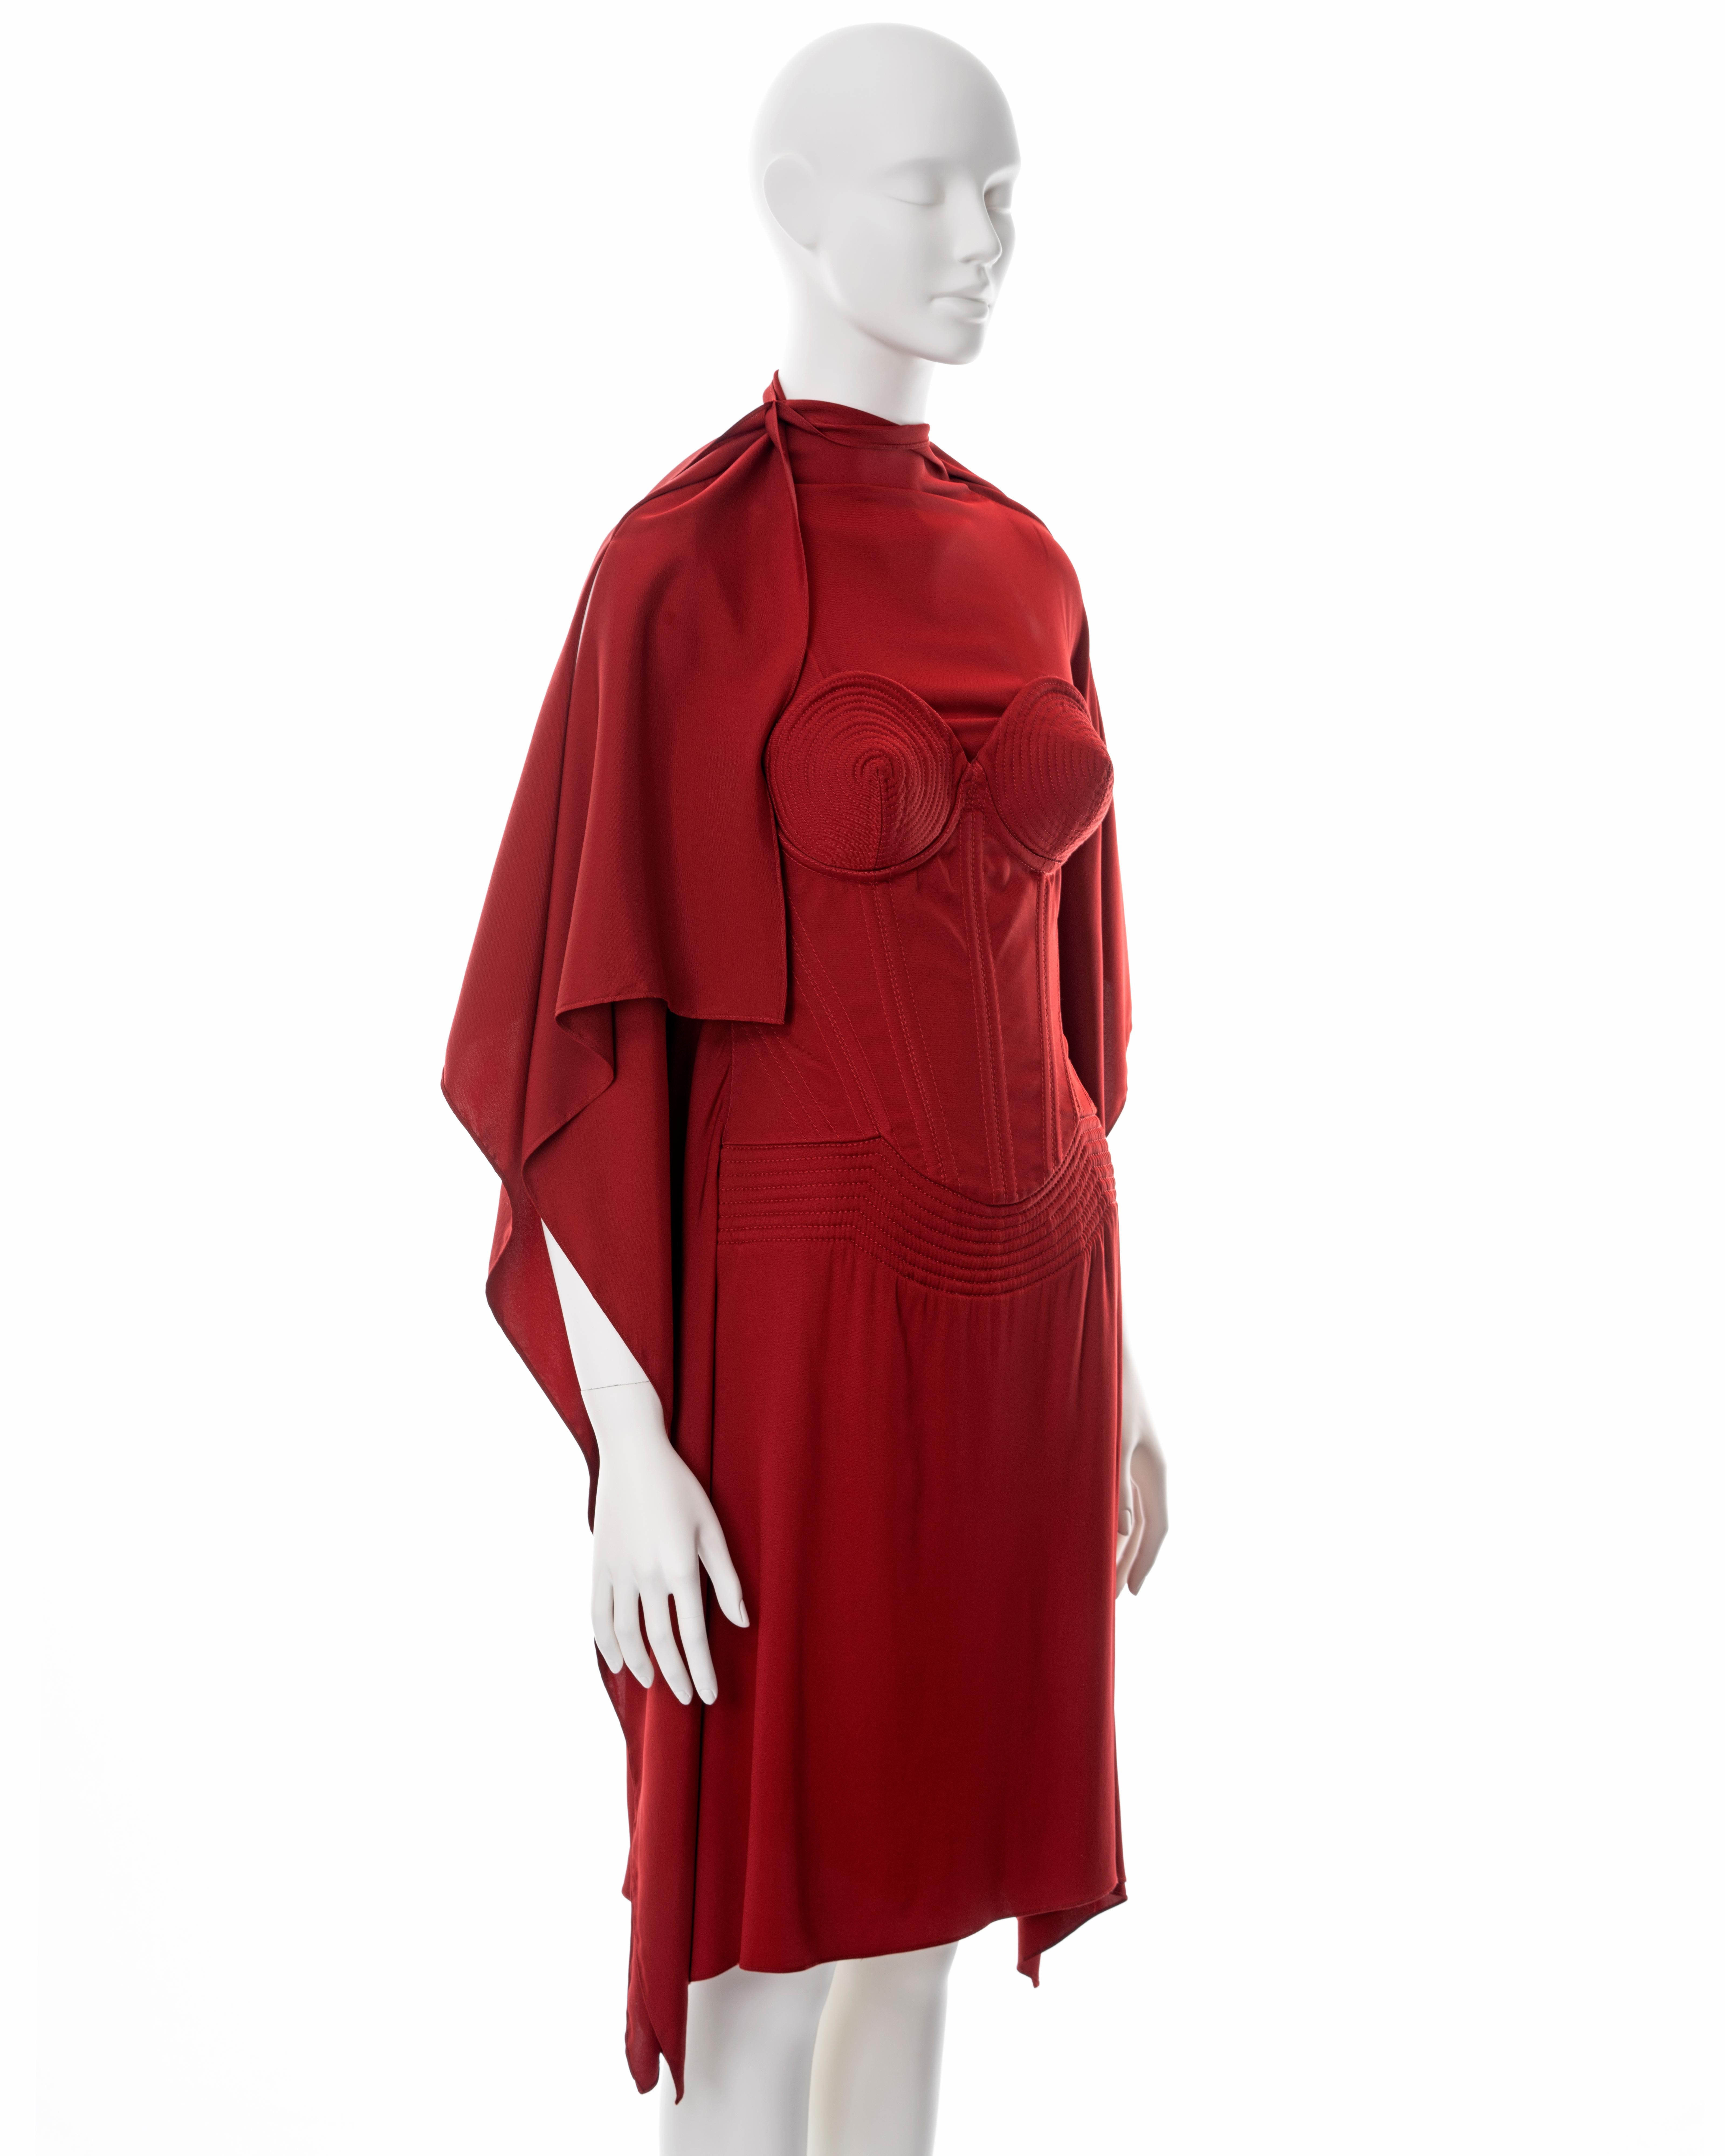 Women's Jean Paul Gaultier red silk dress with built-in cone bra and corset, fw 2010